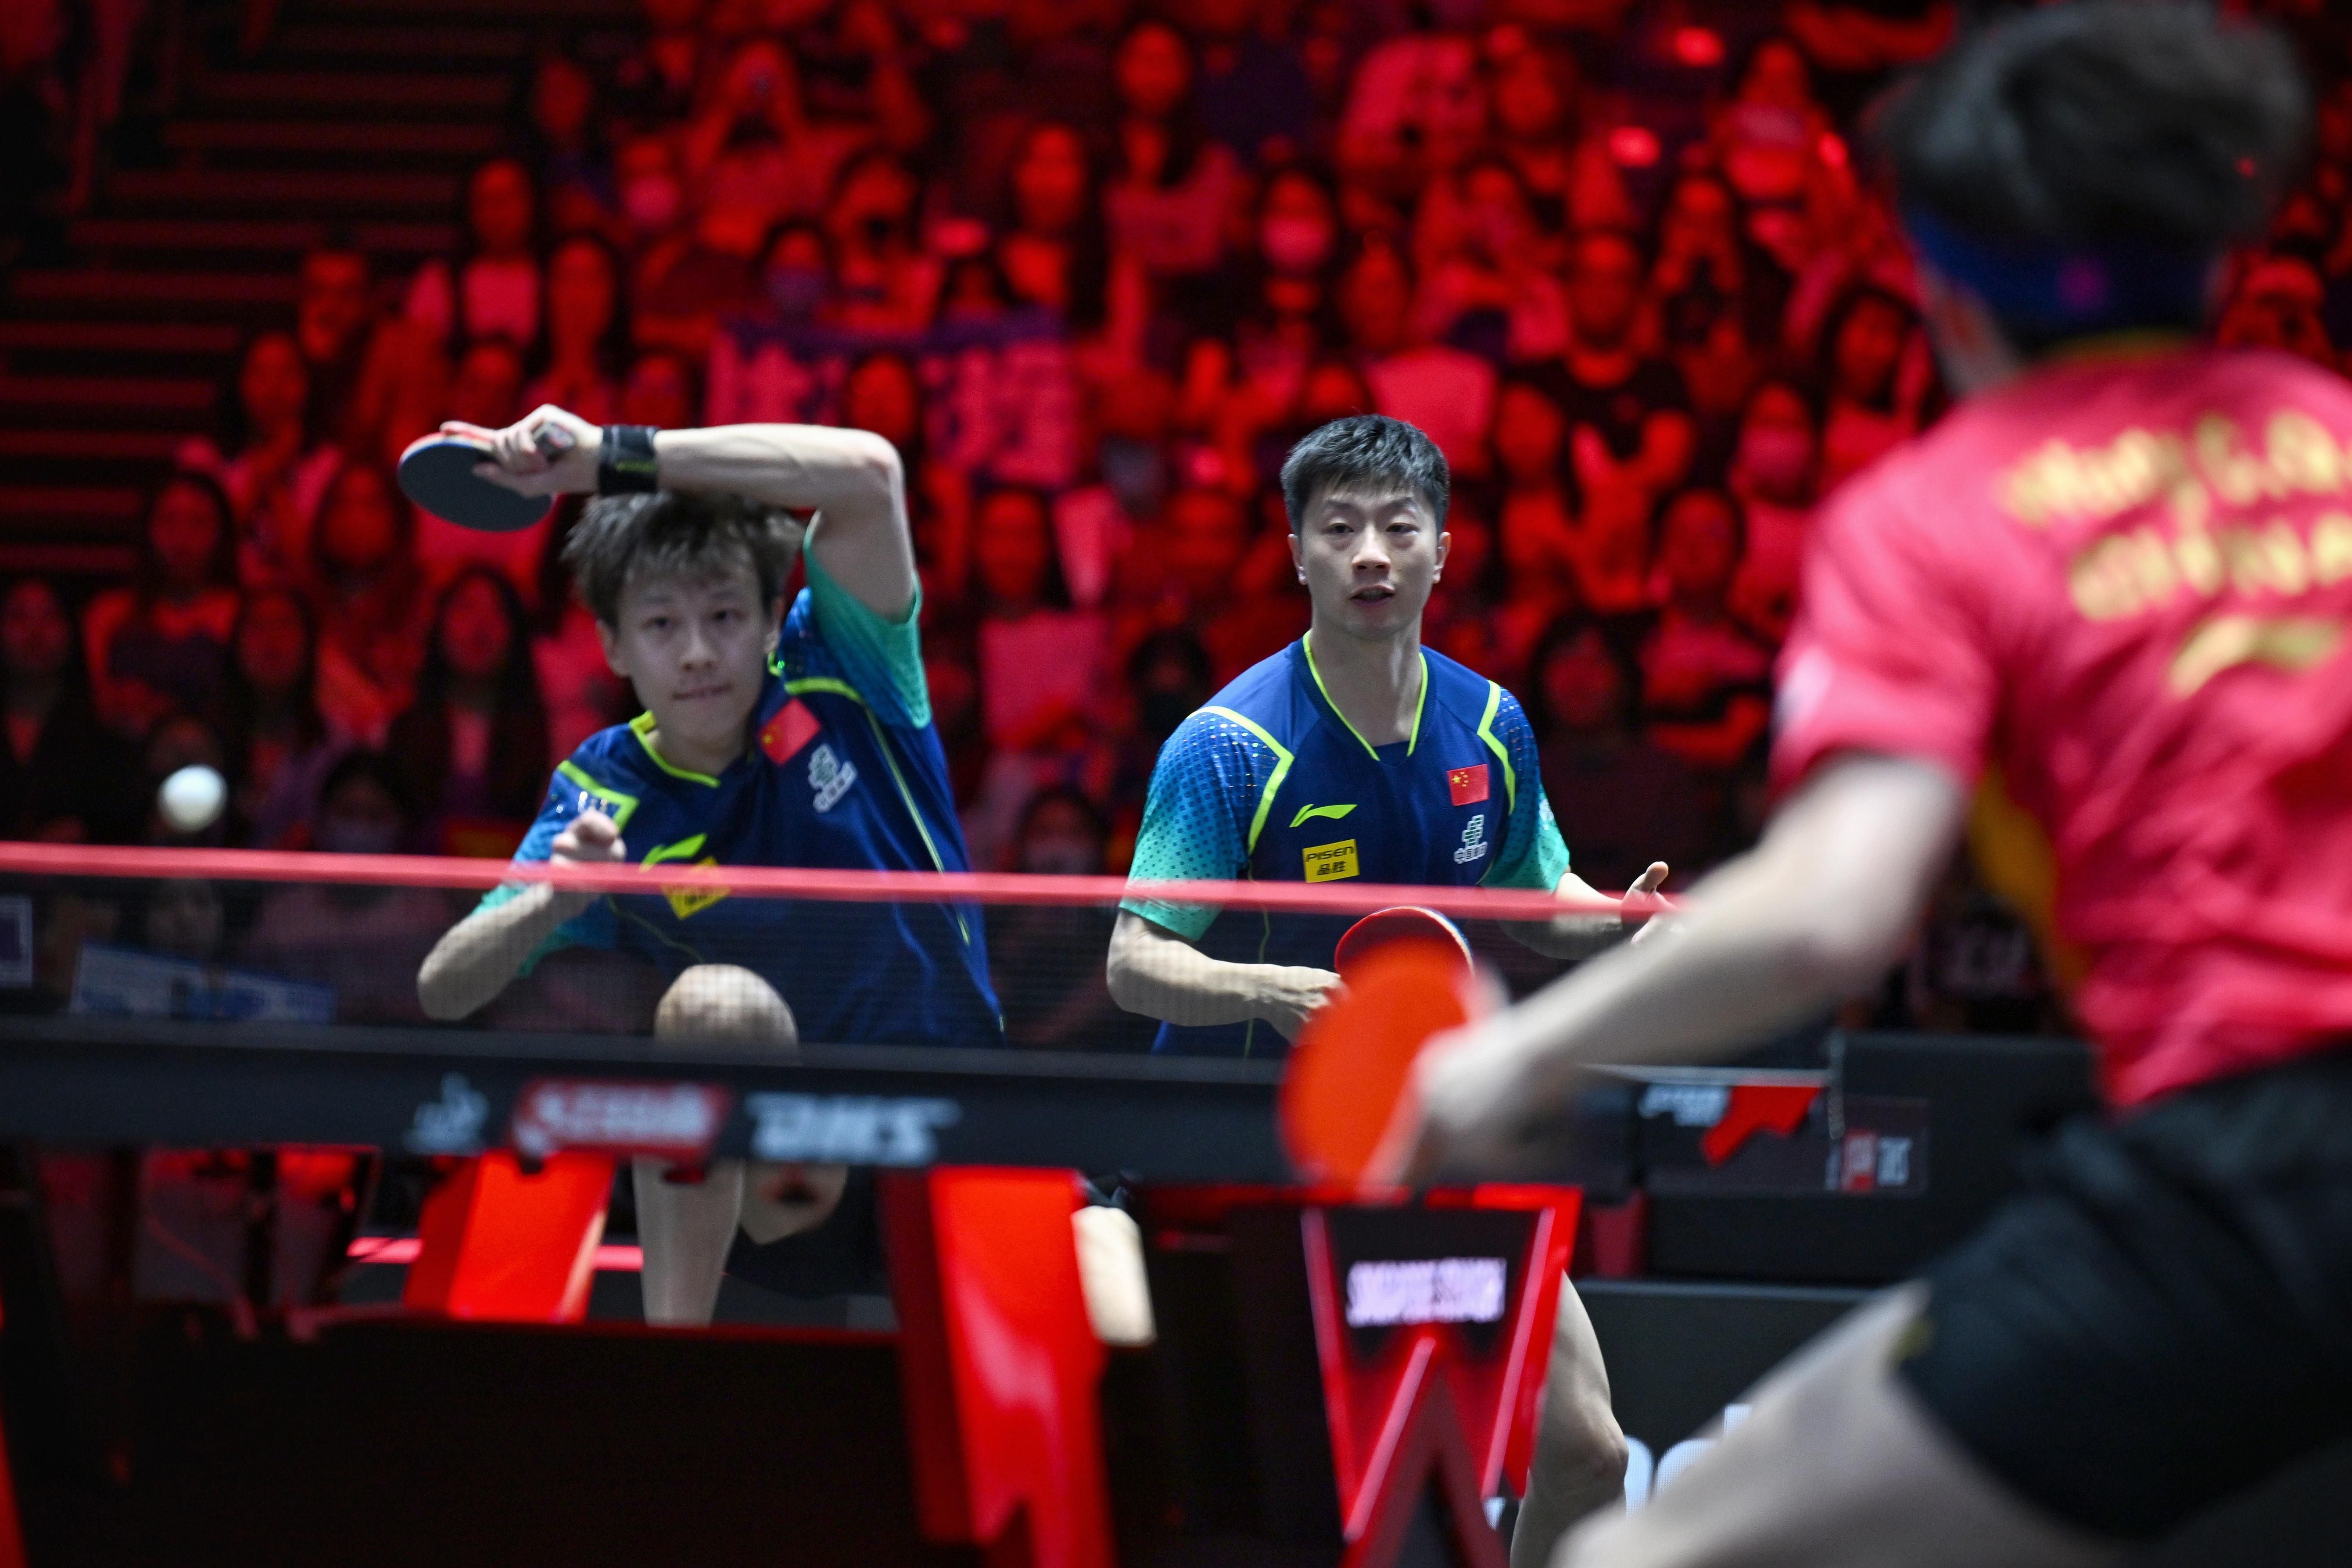 Chinese table tennis star Ma Long teams up with Lin Gaoyuan for first Singapore Smash title